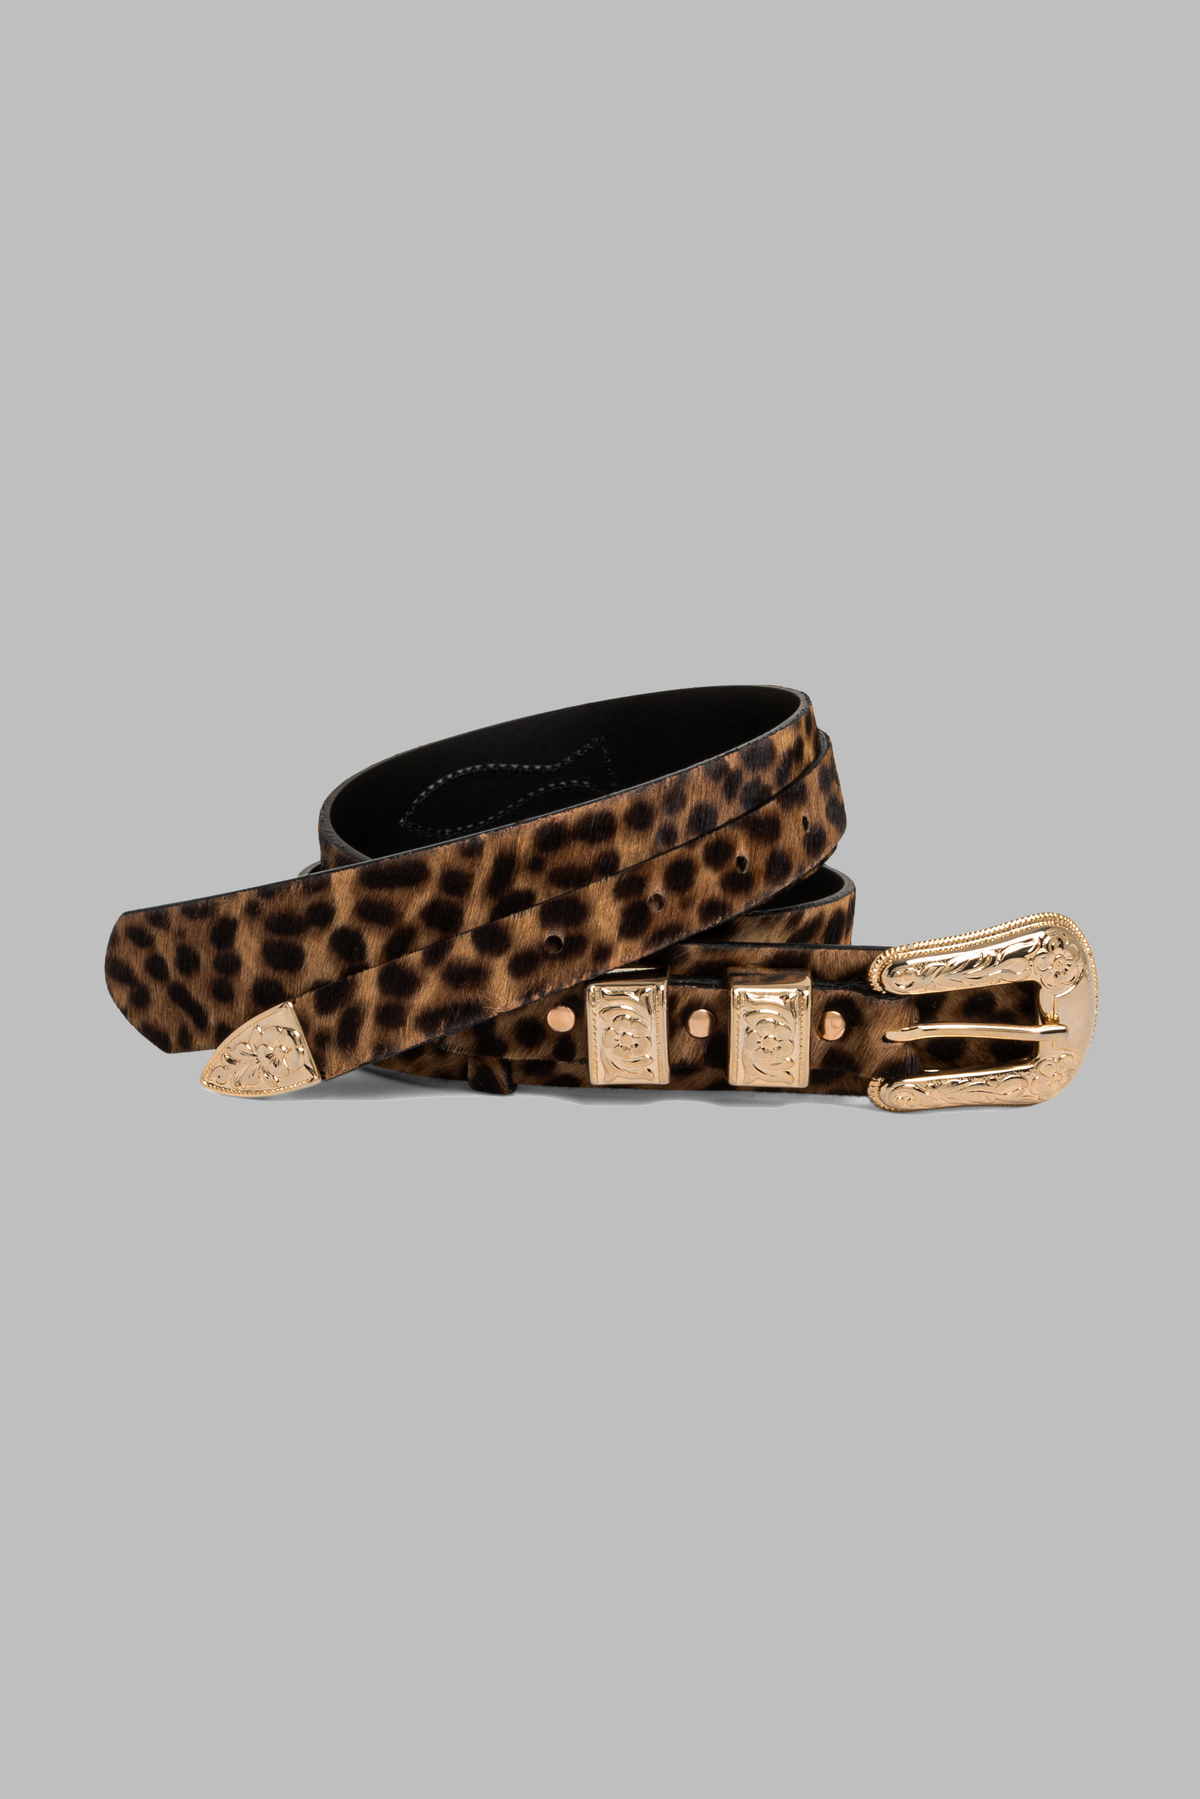 Texan belt in Leopard printed leather